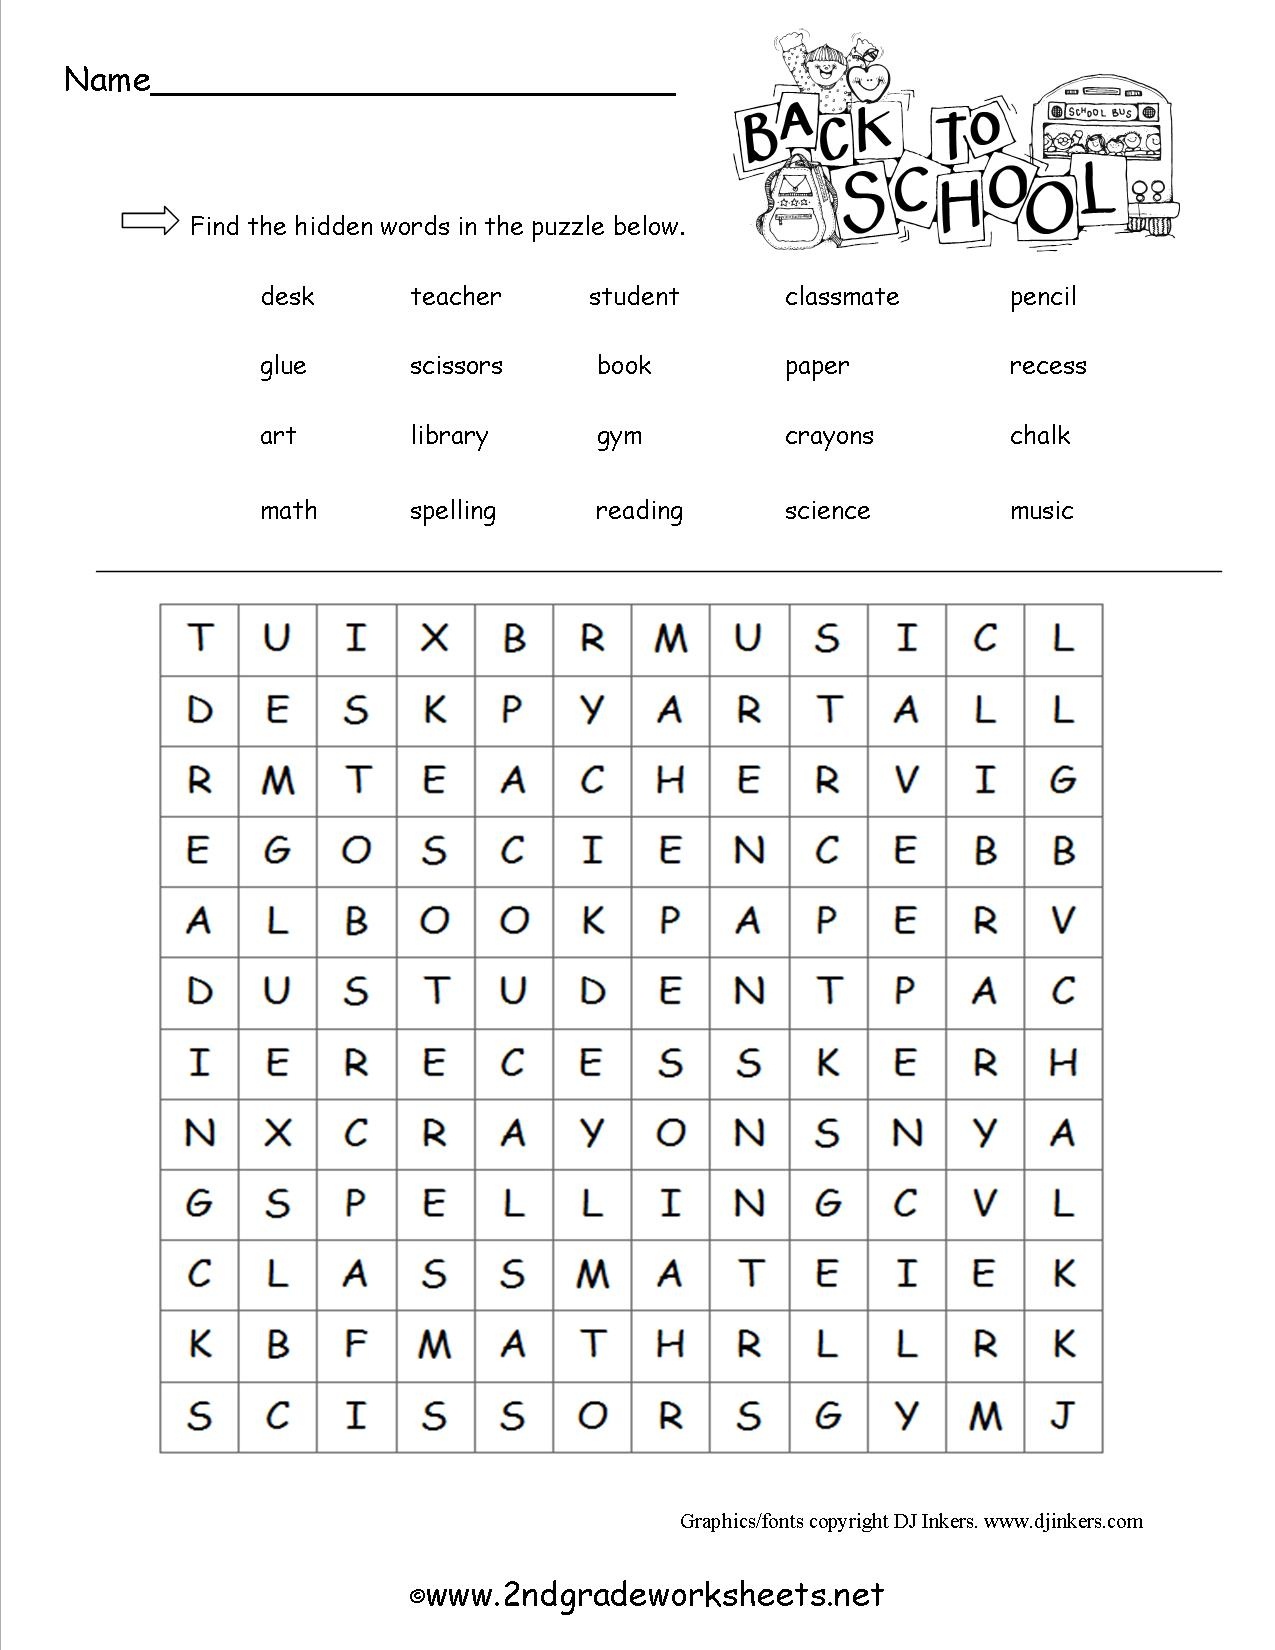 Free Back To School Worksheets And Printouts - Free Printable Back To School Worksheets For Kindergarten